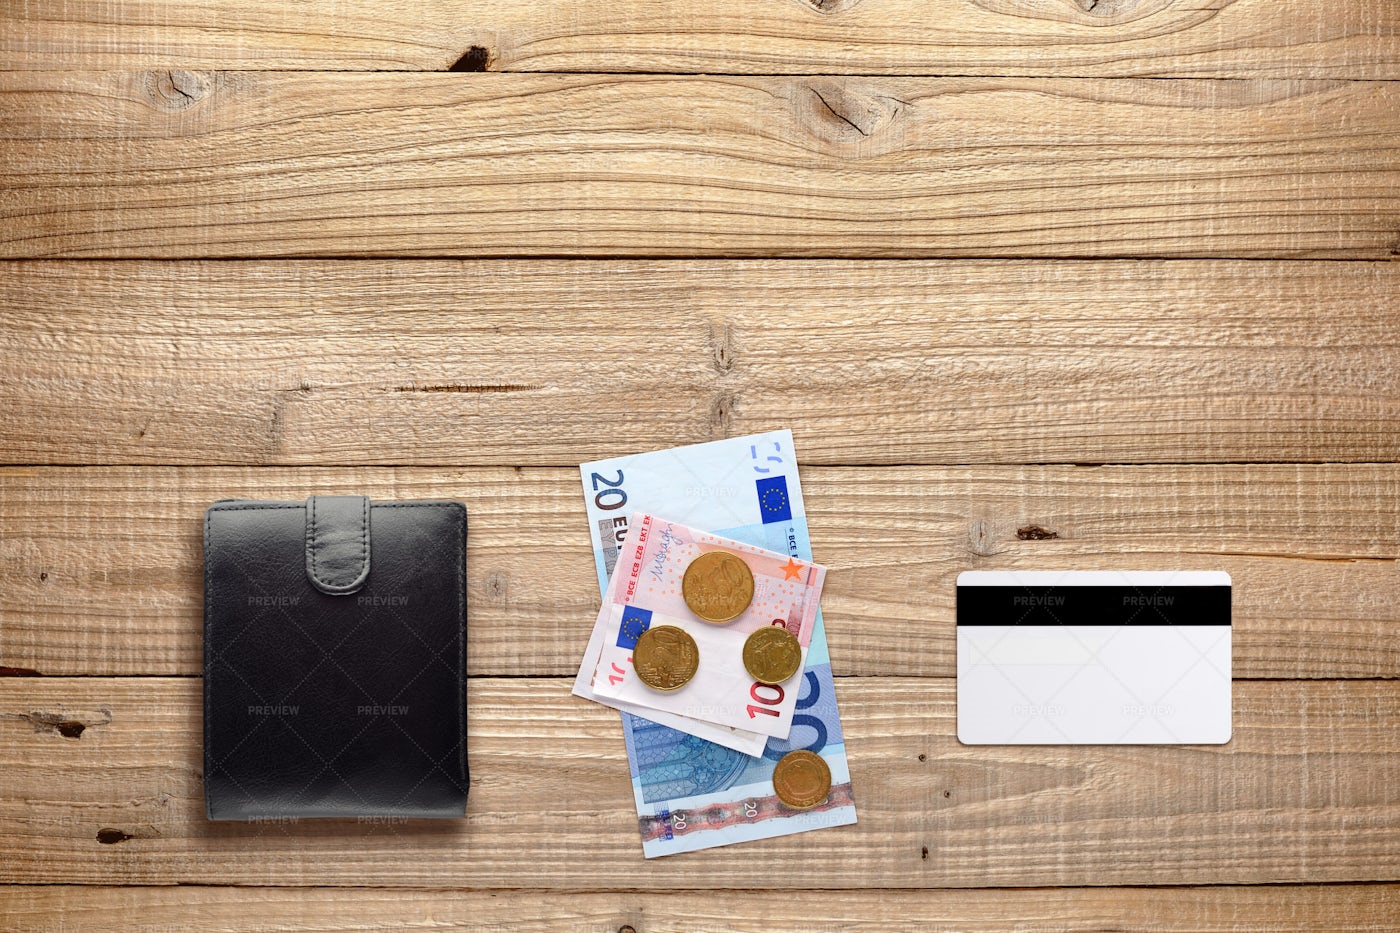 Wallet, Money And Plastic Card: Stock Photos